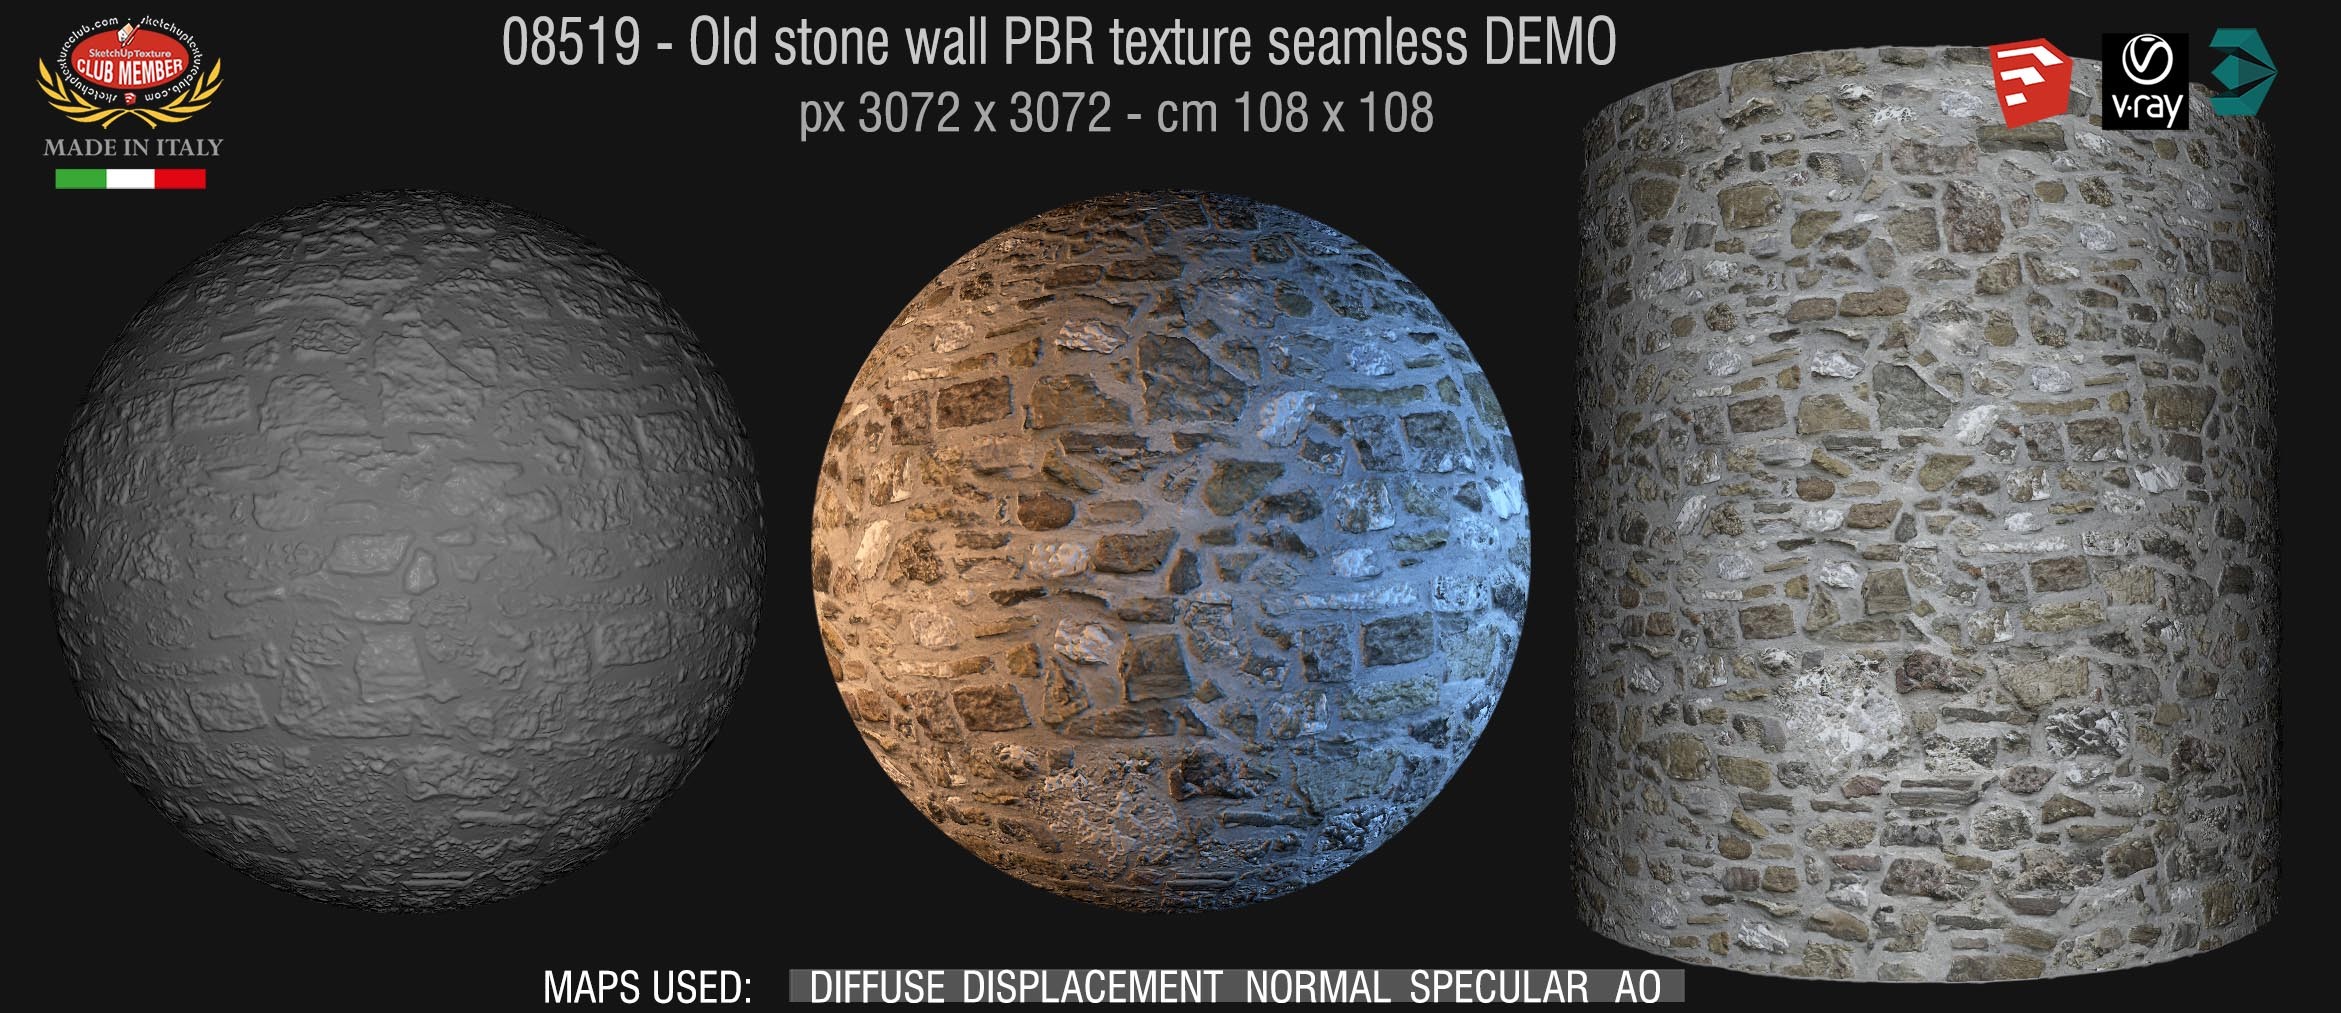 08519 Old stone wall PBR texture seamless DEMO